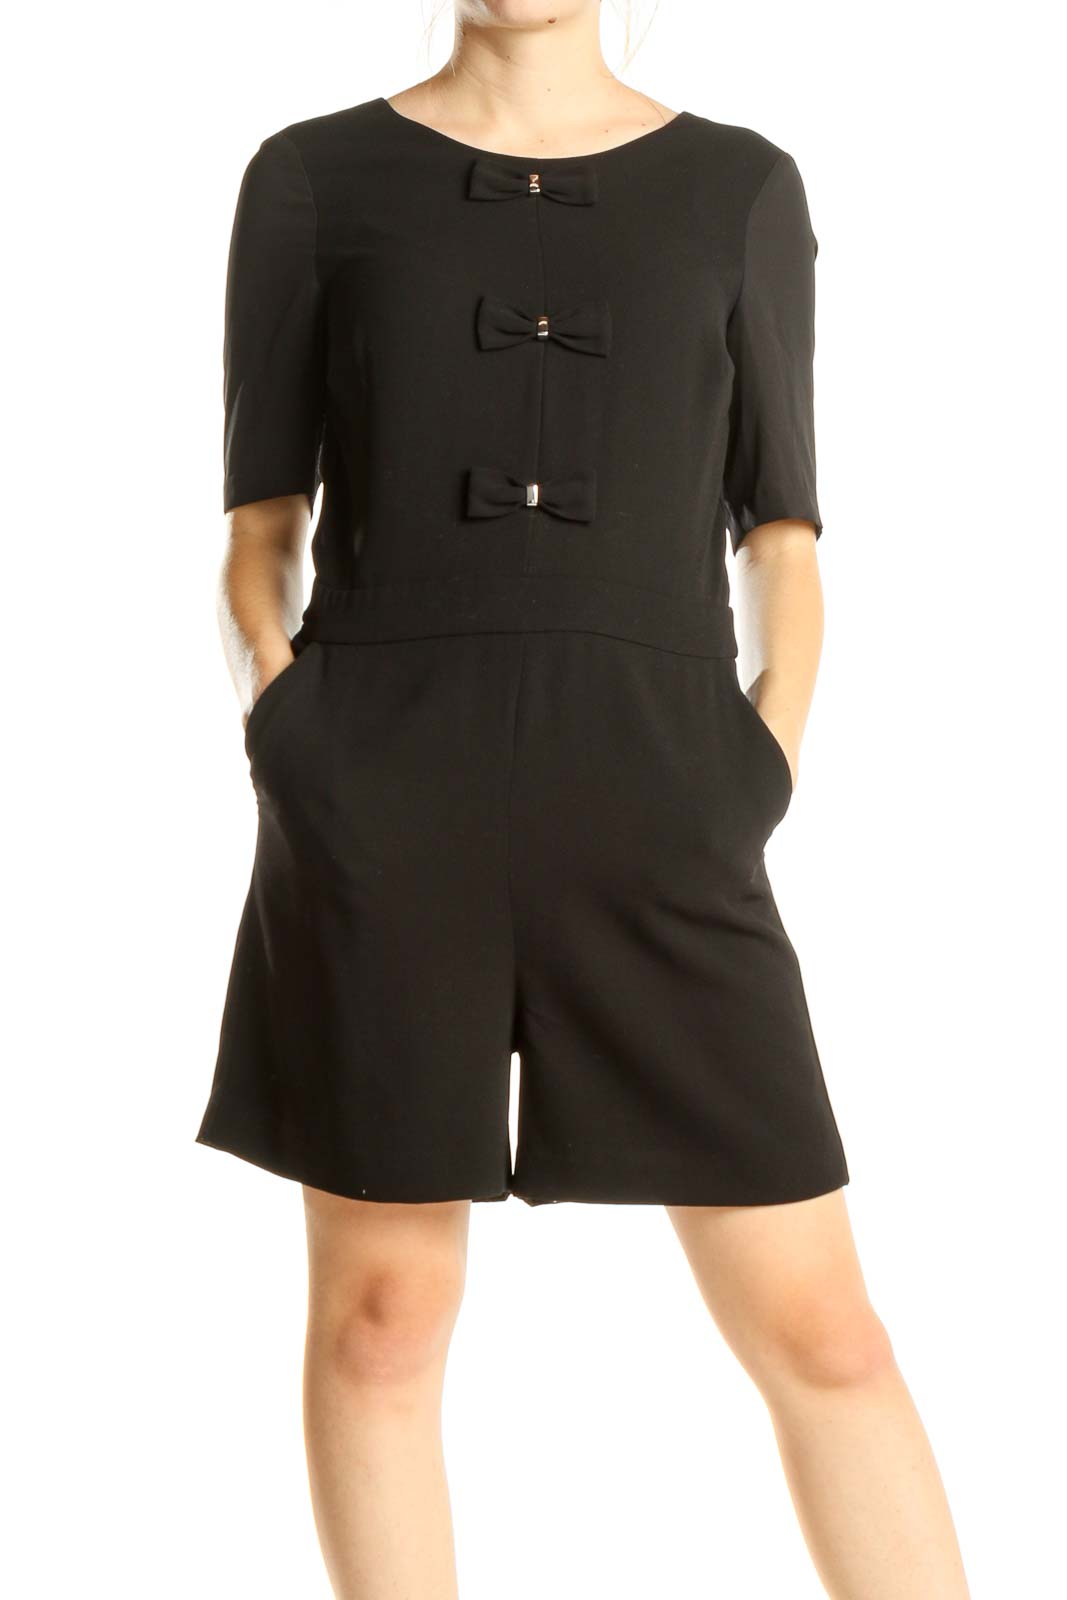 Black Chic Romper With Bow Detail Front